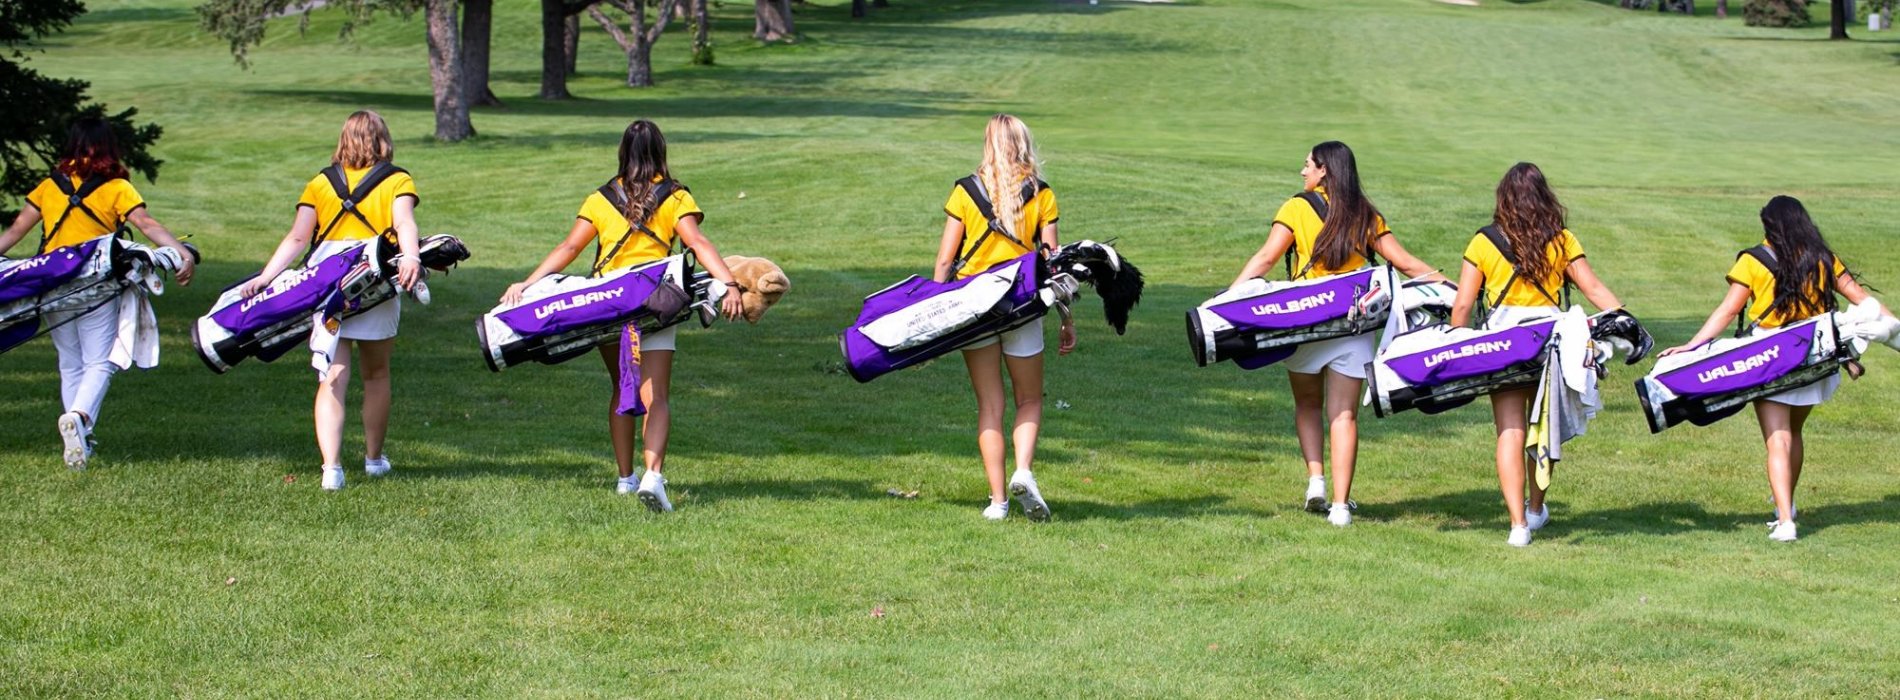 ualbany women's golf team walks up a fairway with their golf bags.